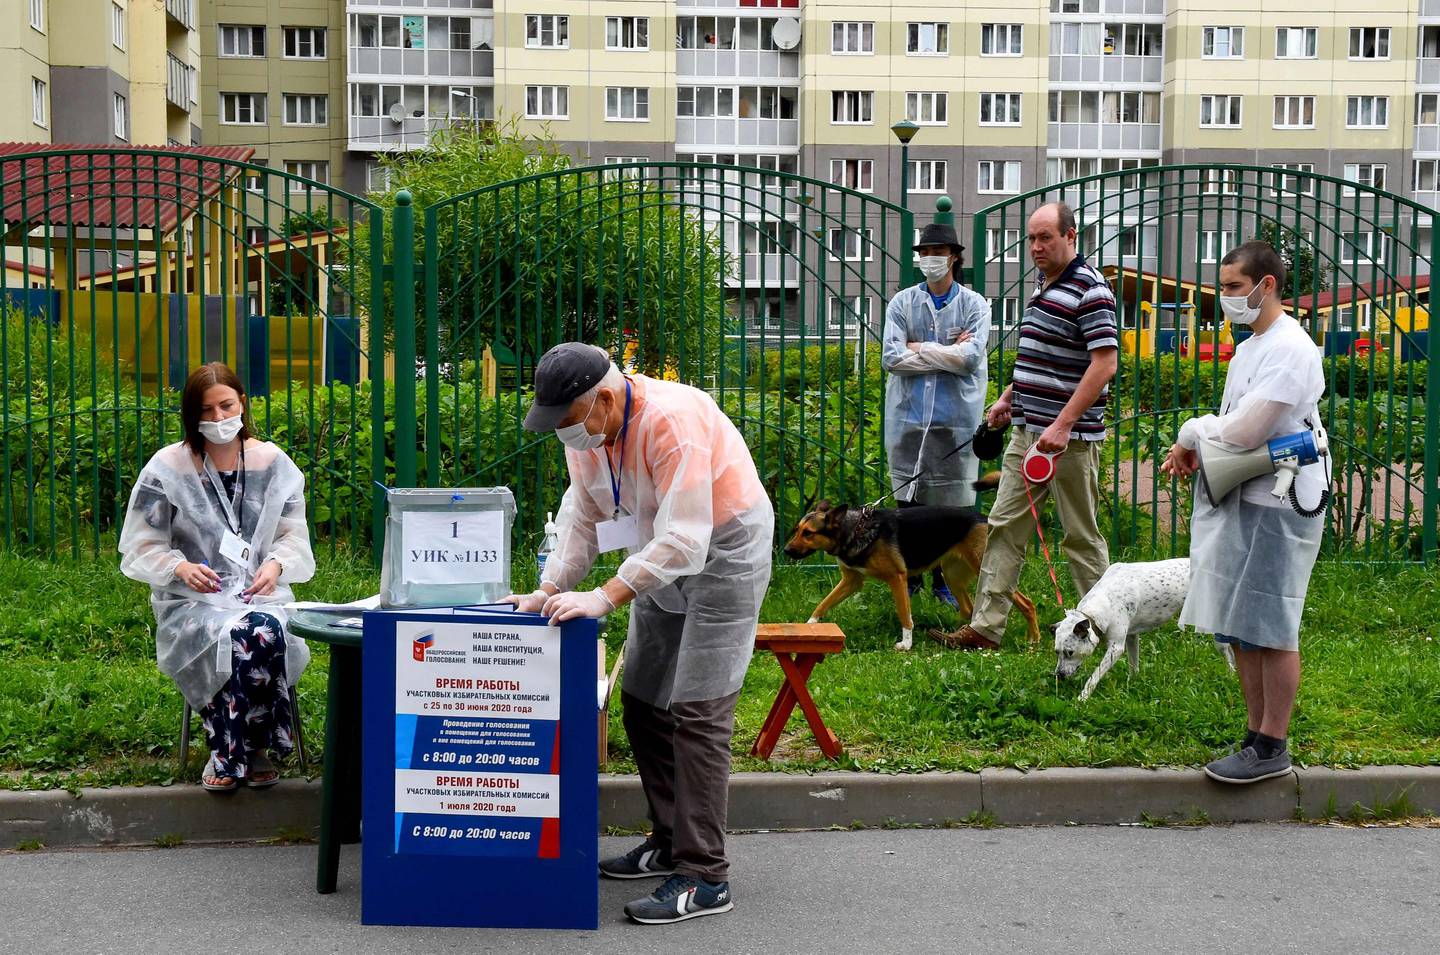 A man walks dogs as members of a local electoral commission wearing face masks wait for local residents at an outdoor polling station in Saint Petersburg on June 28, 2020. - The rickety plastic table beneath a row of towering apartment blocks in Russia's second city Saint Petersburg does not look much like a polling booth. But as Russians cast votes this week on constitutional reforms that could extend President Vladimir Putin's rule until 2036, the picnic furniture has taken on official status. (Photo by OLGA MALTSEVA / AFP)